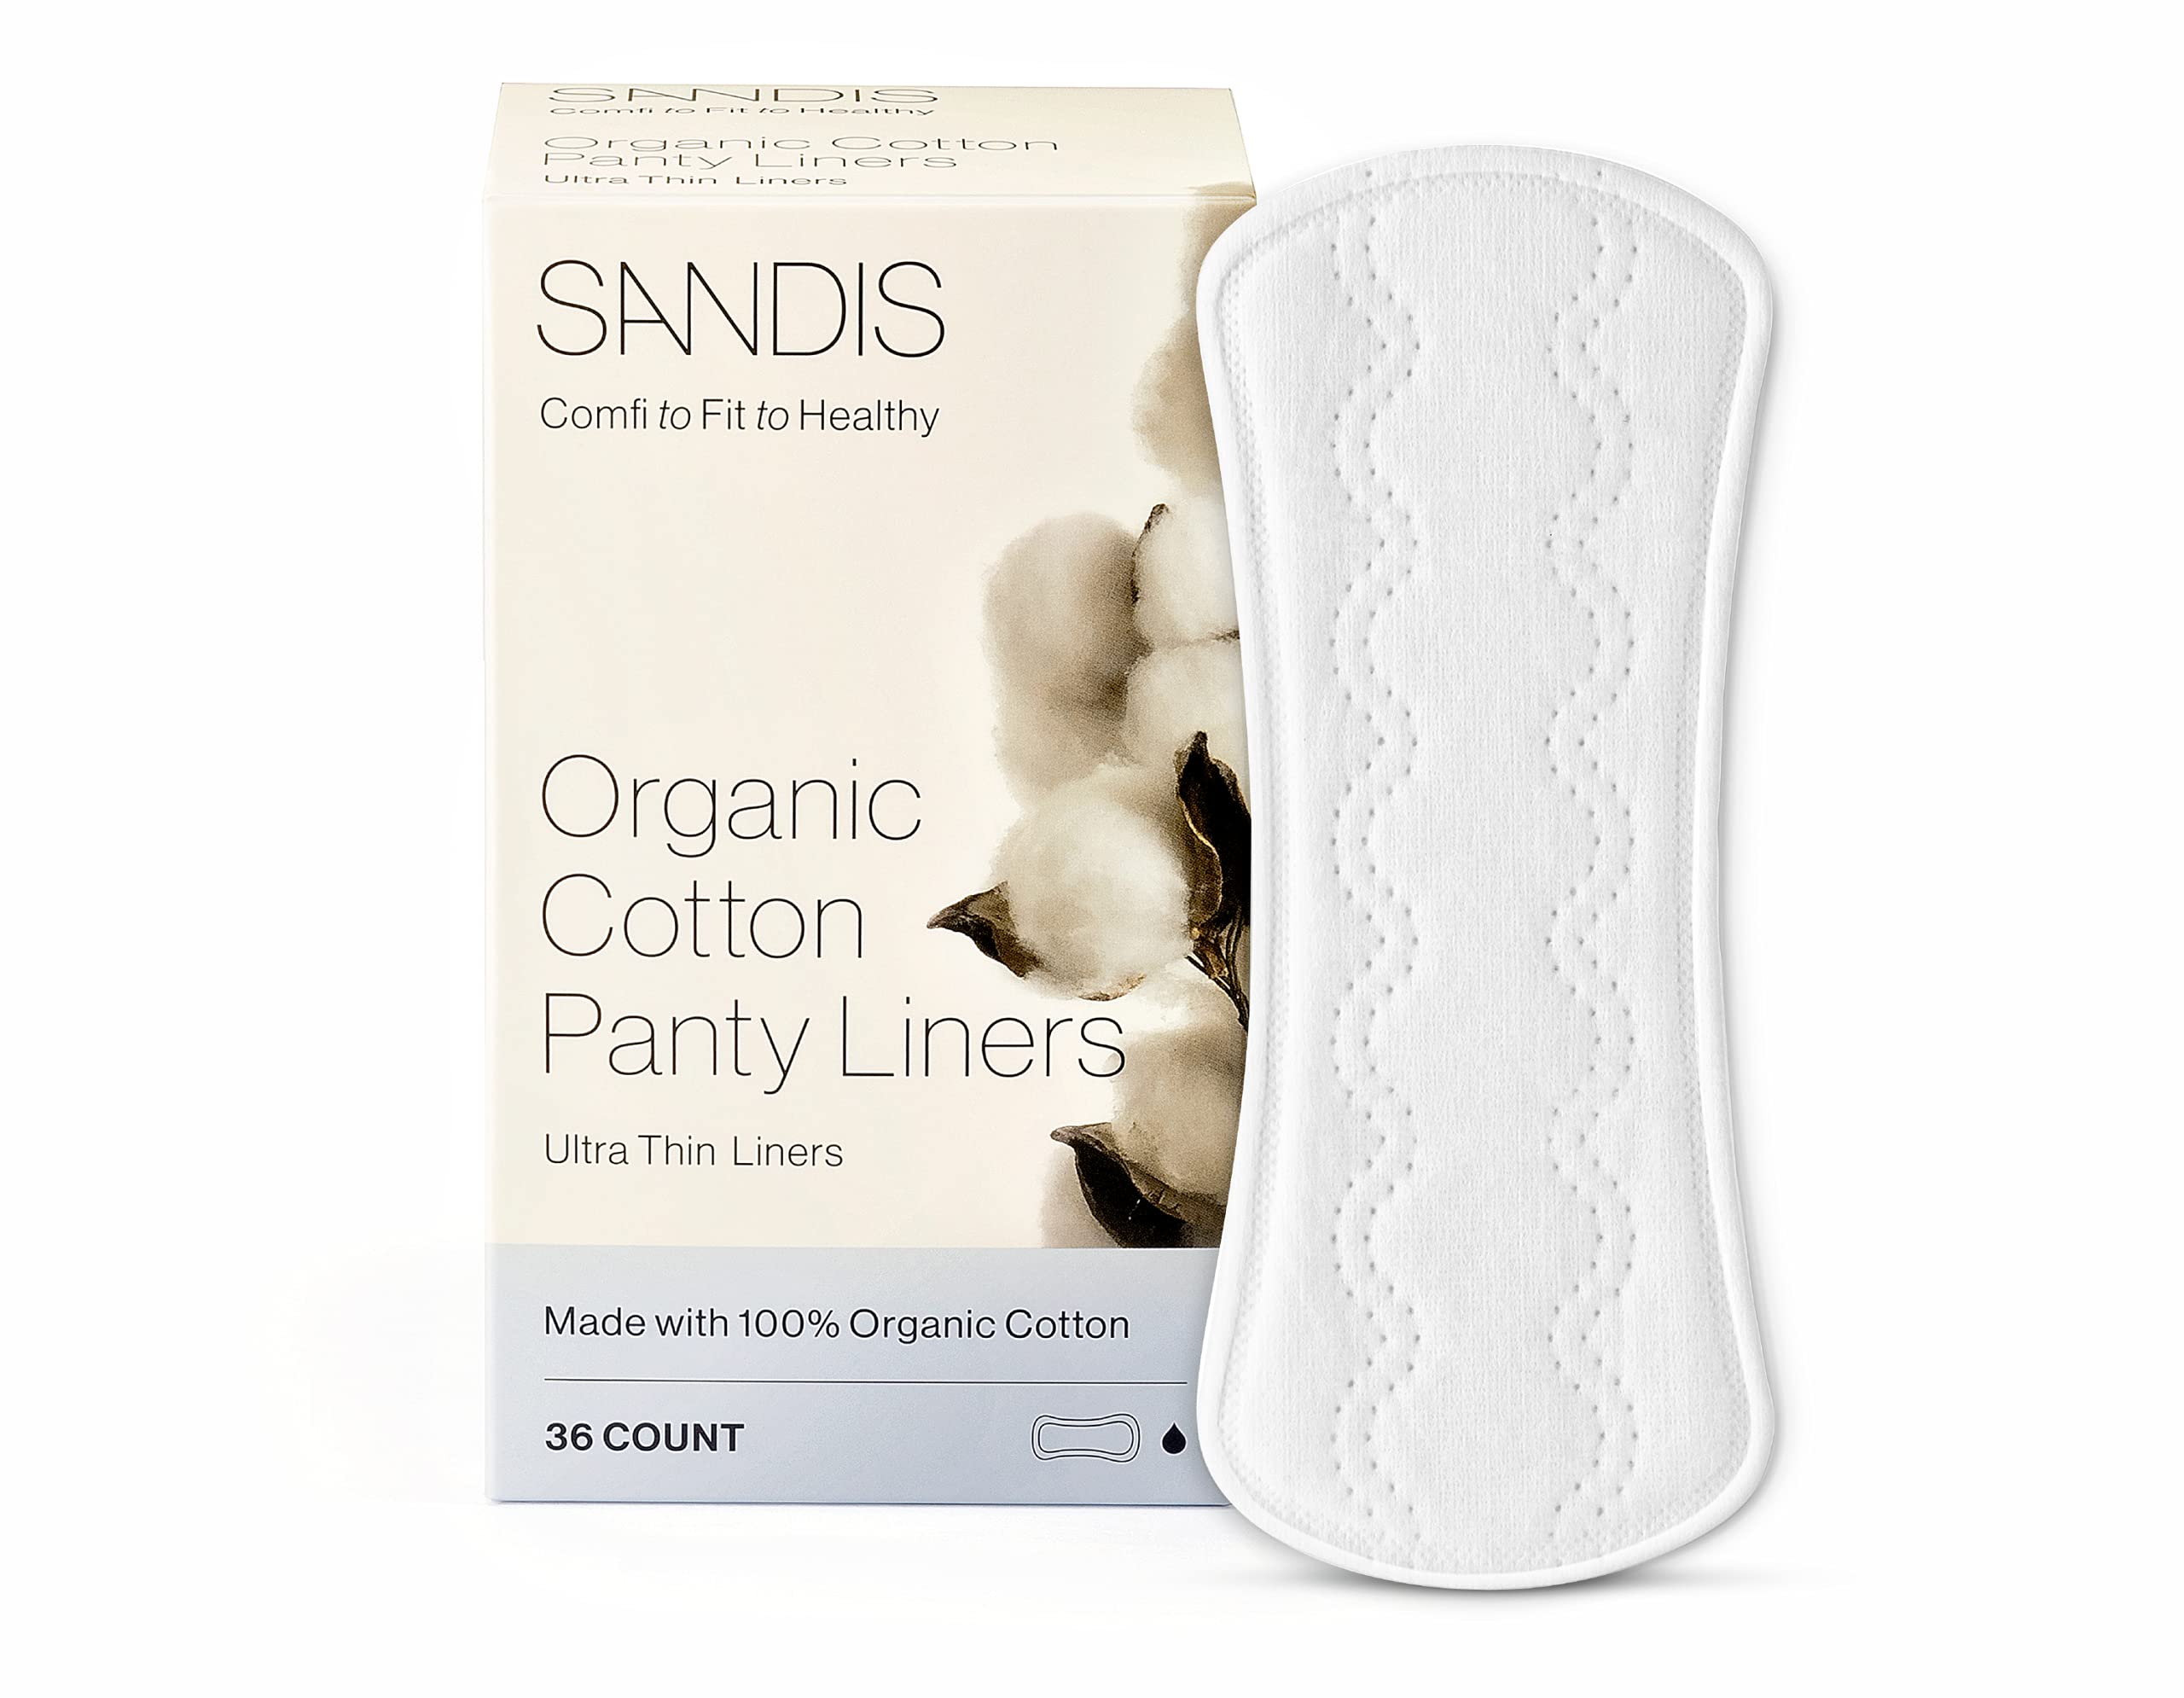 Thin Liners, Regular Absorbency Panty Liners